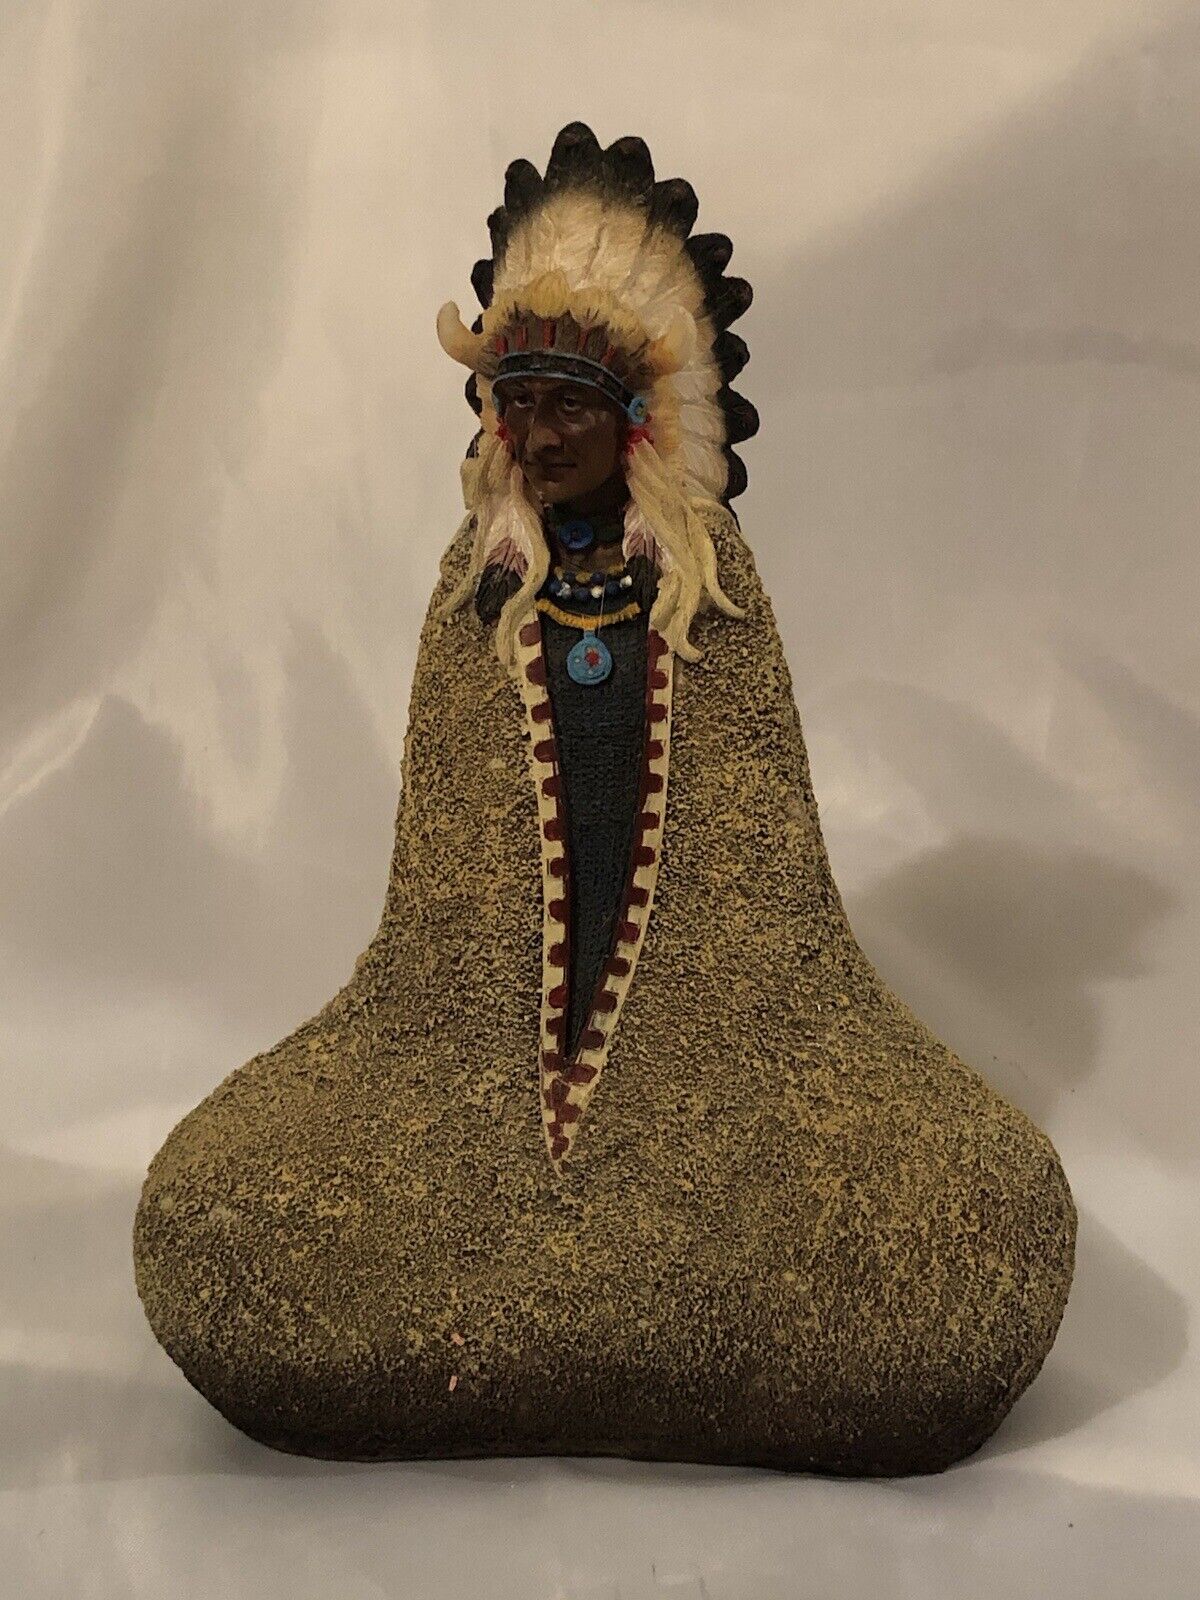 VTG Native American Chief Sitting Wrapped In A Blanket Resin Figurine